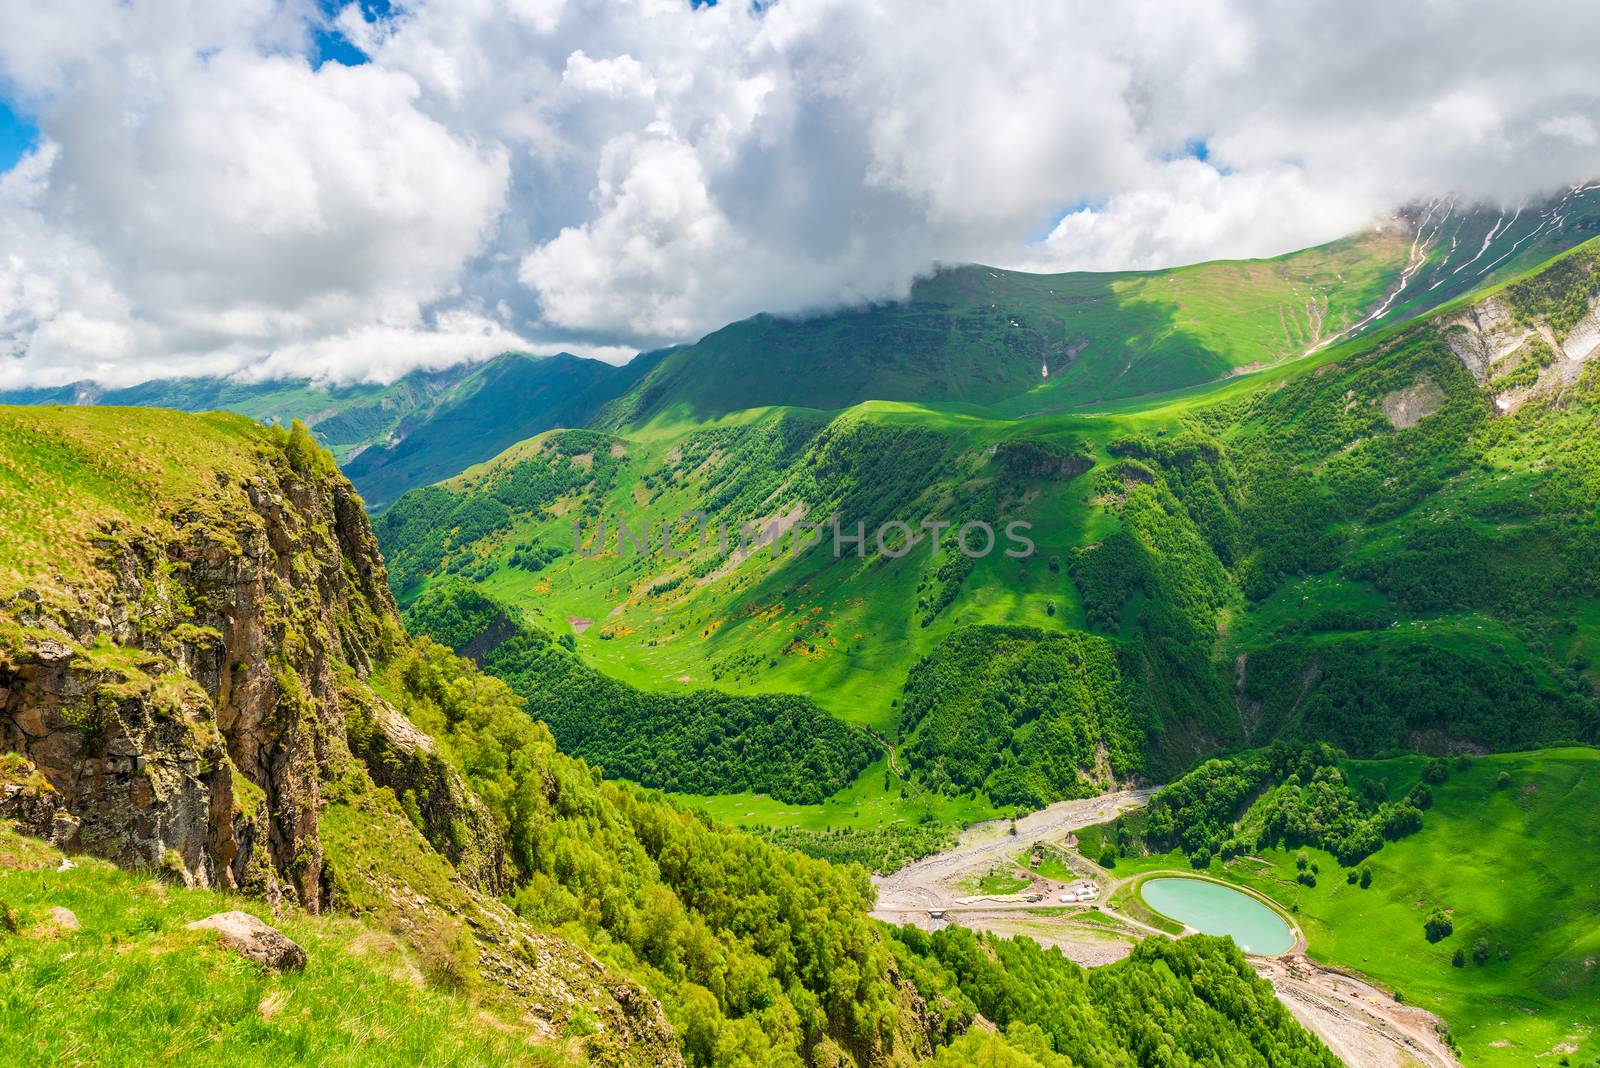 Gorge of the Caucasus scenic mountains, the landscape of Georgia